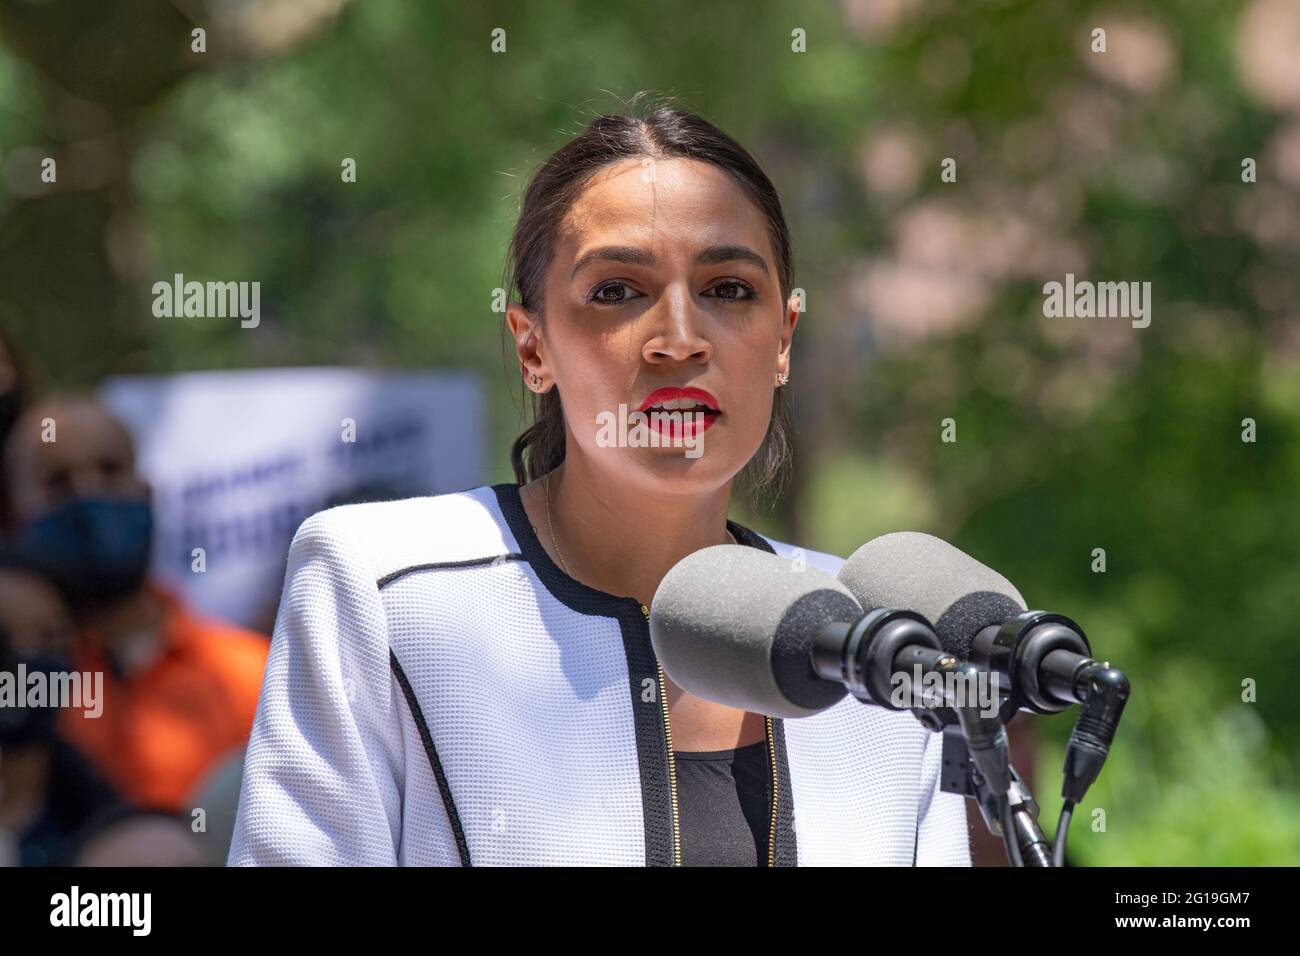 United States Congresswoman Alexandria Ocasio-Cortez speaks at a rally outside City Hall in New York City. Representative Alexandria Ocasio-Cortez endorses Juumane Williams for Public Advocate, Brad Lander for Comptroller as well as 60 progressive New York City Council candidates, stretching across all five boroughs, who took the Courage To Change pledge. Stock Photo